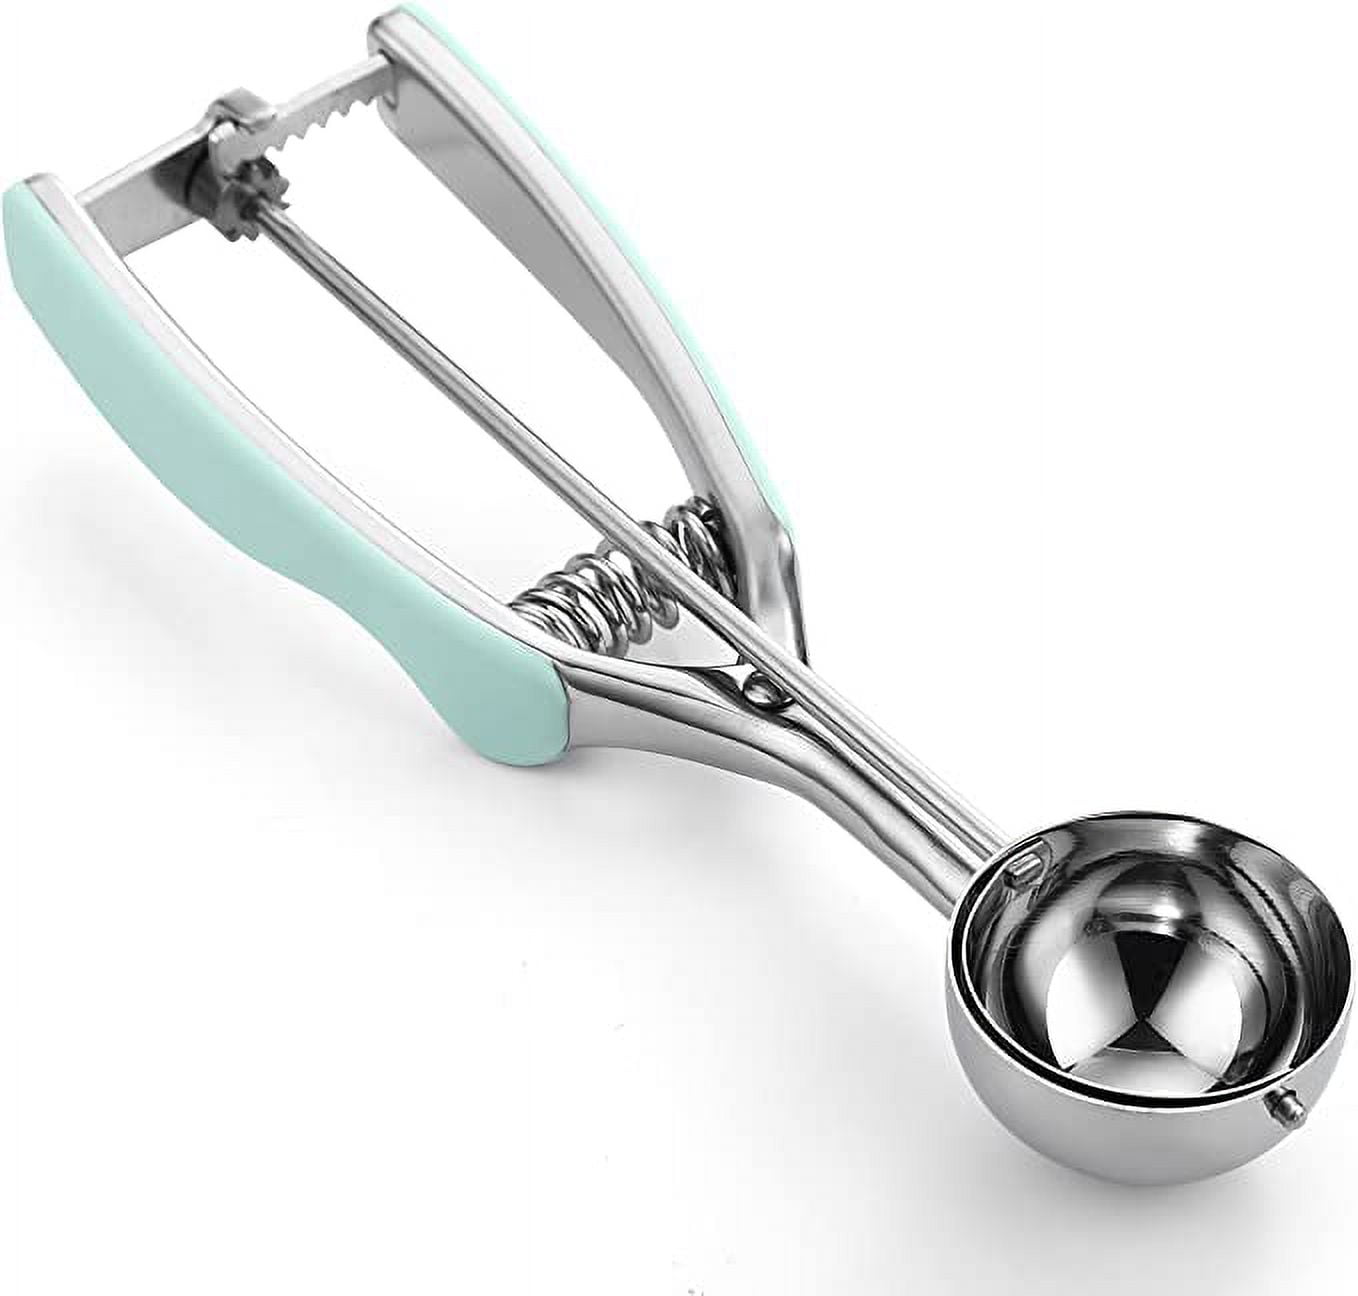 Cookie Scoop, Premium 18/8 Stainless Steel Disher with Soft Grip, Loaded  with Trigger Release for Cookie Dough, Melon, Ice Cream, Baking - Medium  Size #40, Mint 